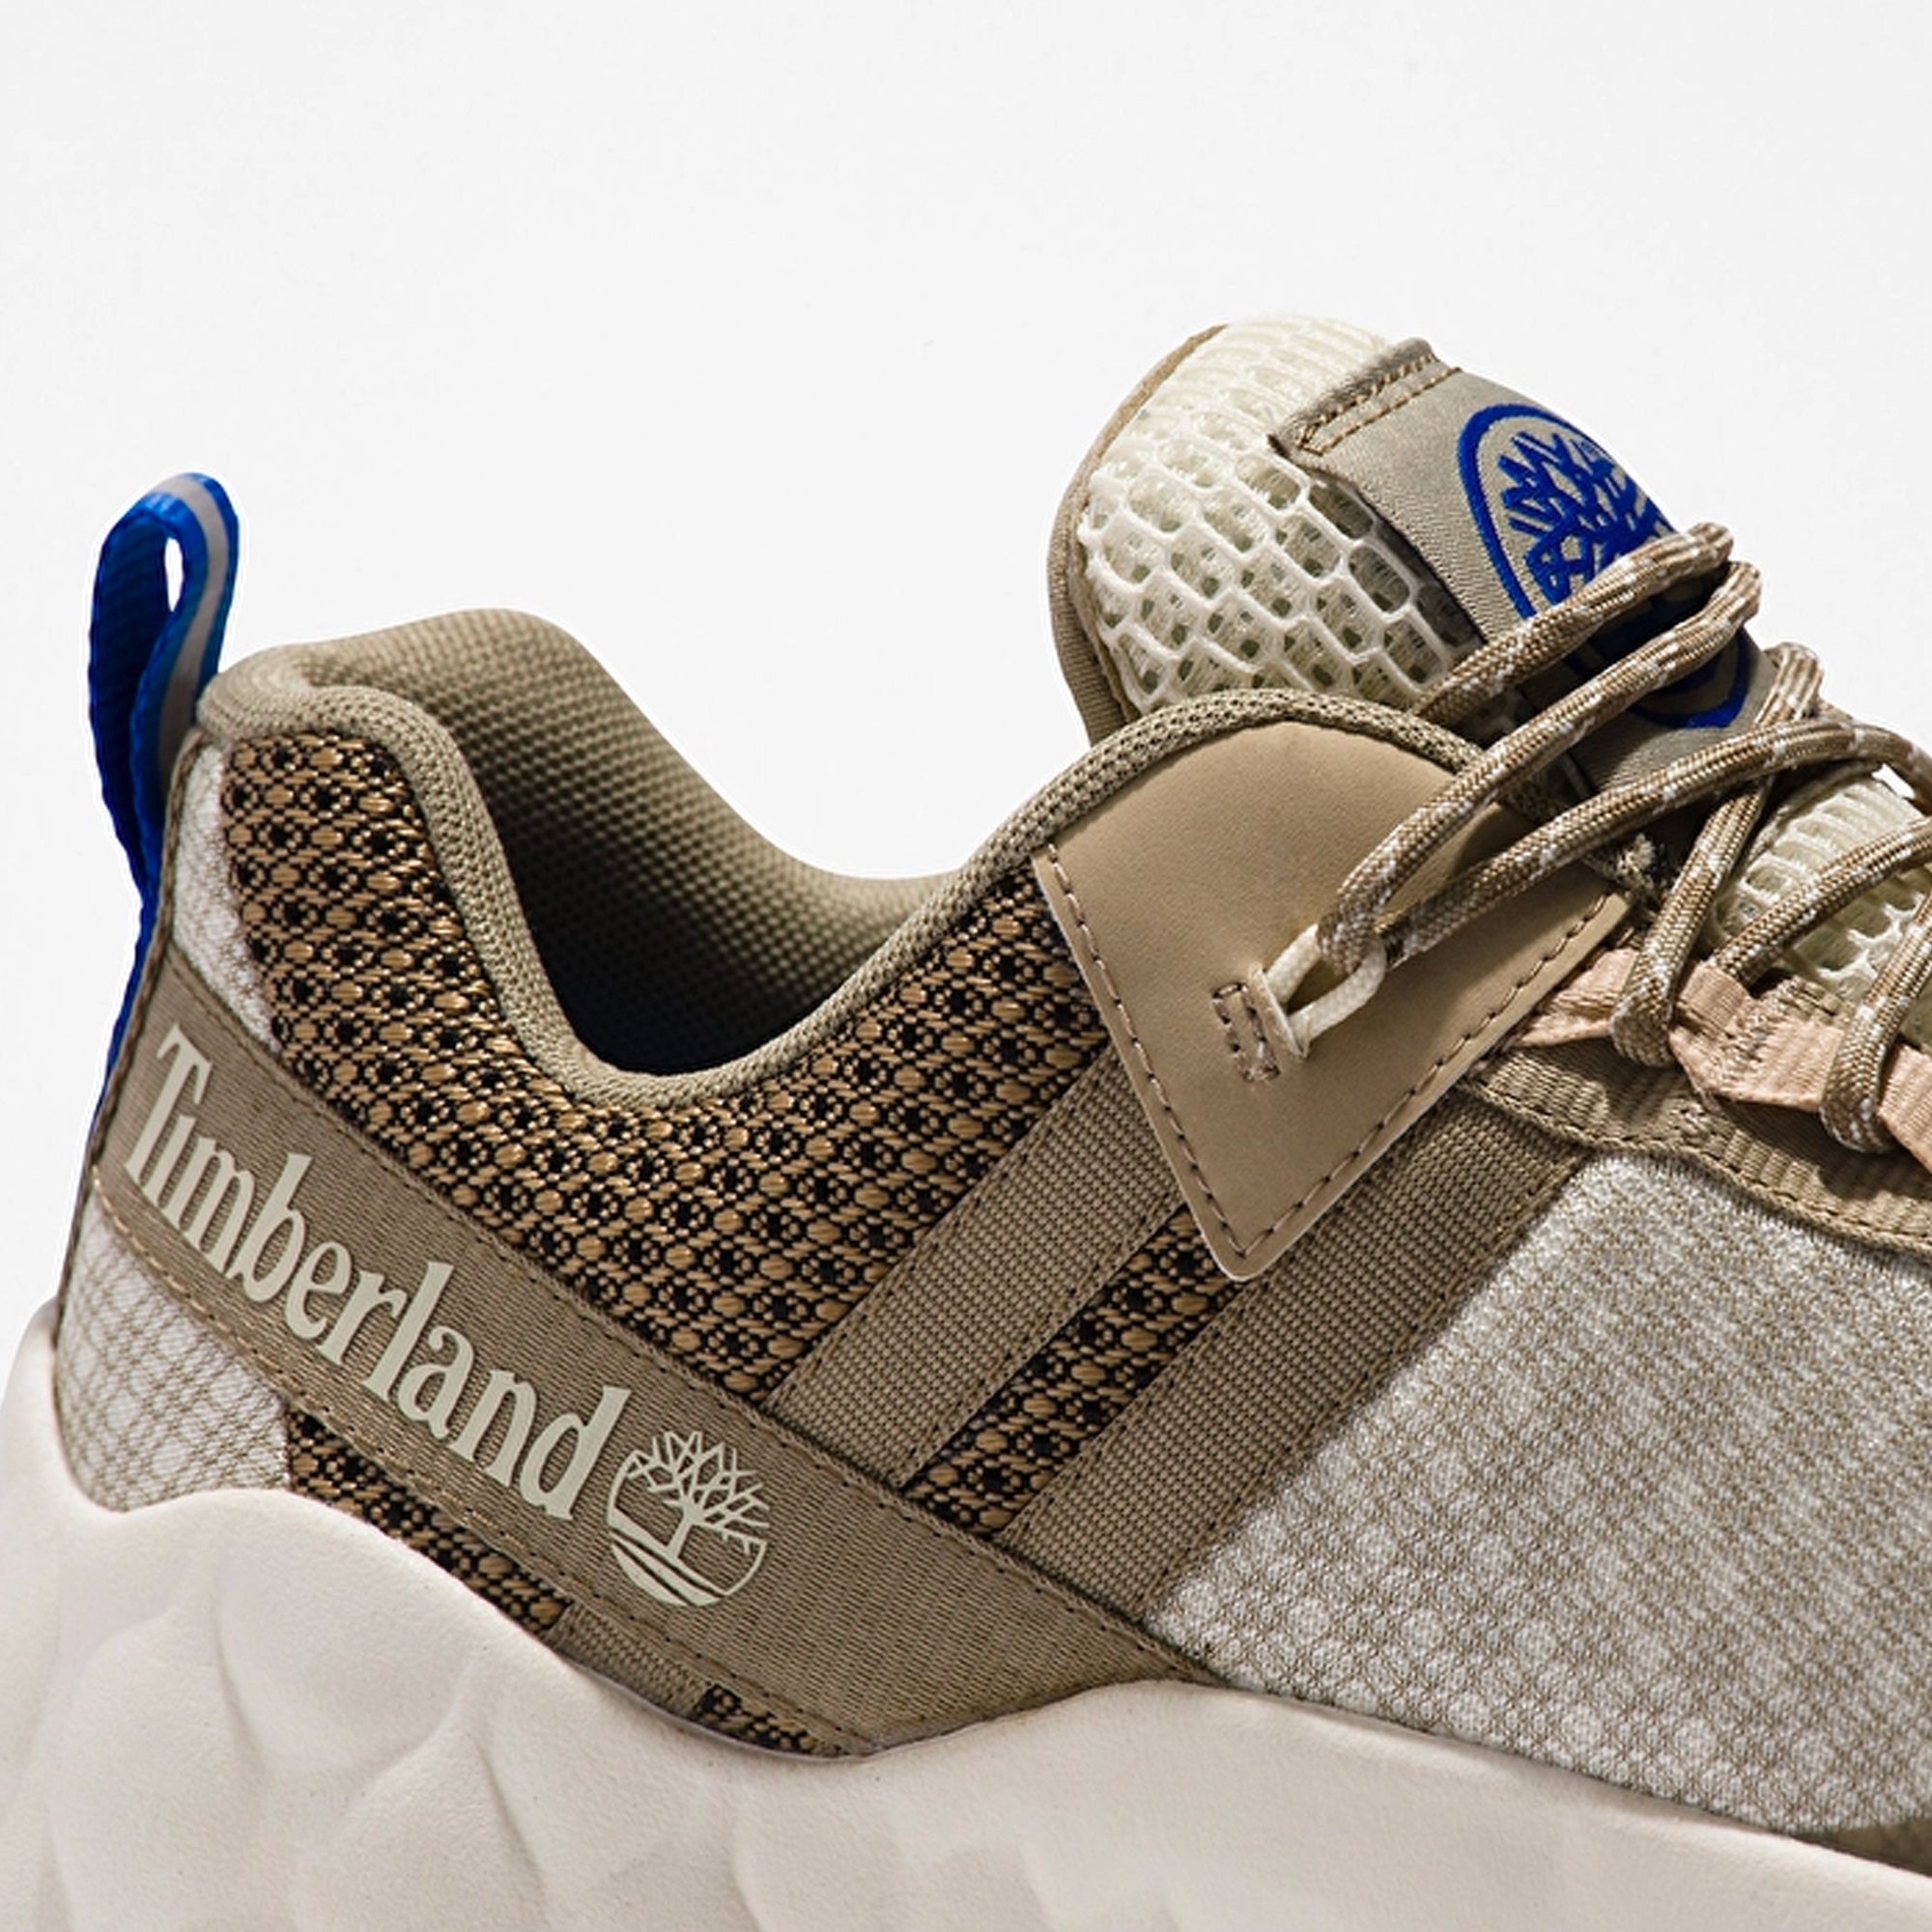 Timberland Solar Wave LT Low Hiker Trainers - Beige